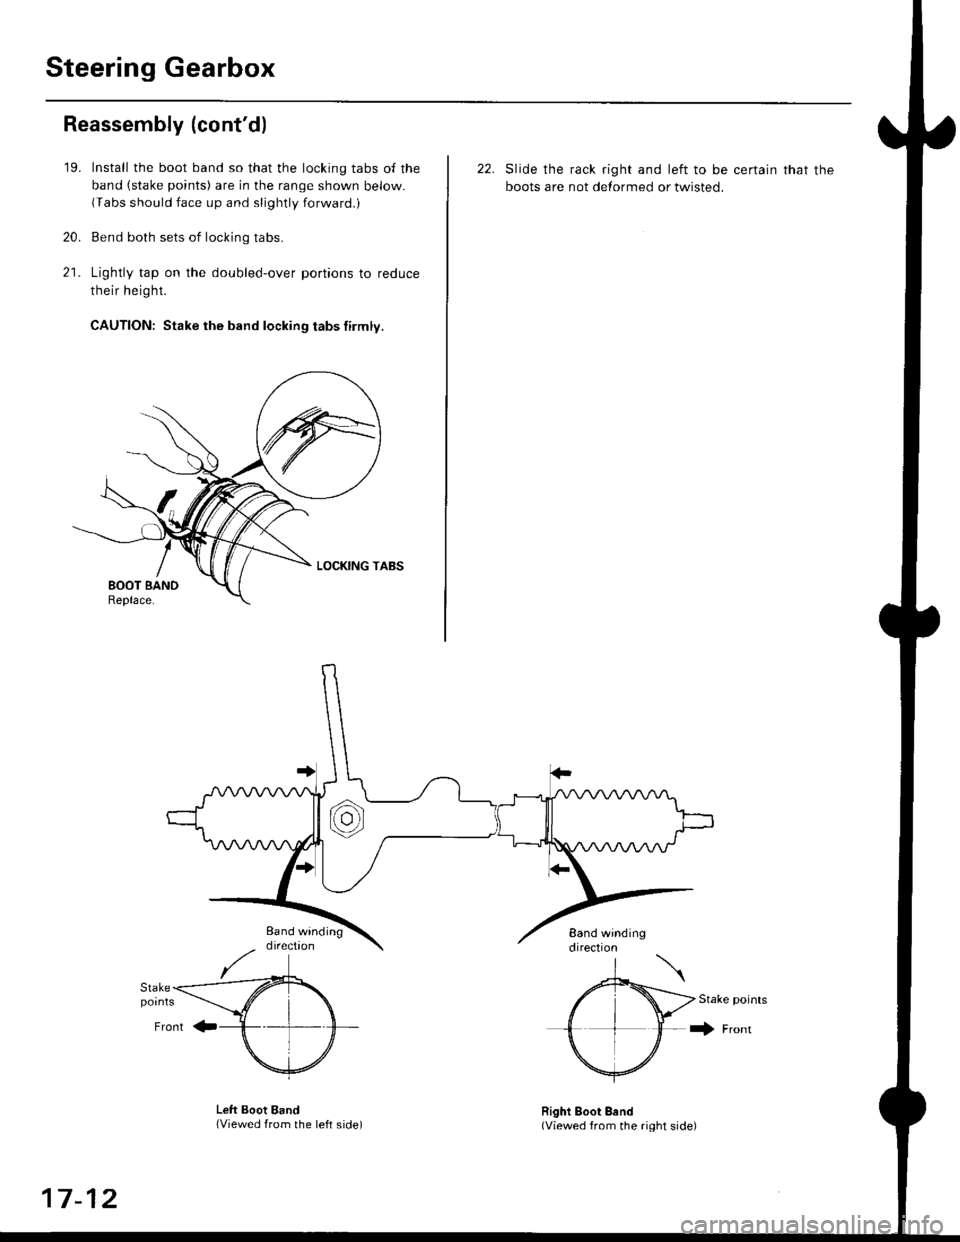 HONDA CIVIC 2000 6.G Owners Guide Steering Gearbox
Reassembly (contd)
21.
19.
20.
Install the boot band so that the locking tabs of the
band (stake points) are in the range shown below.
{Tabs should face up and slightly forwaro.,
Be